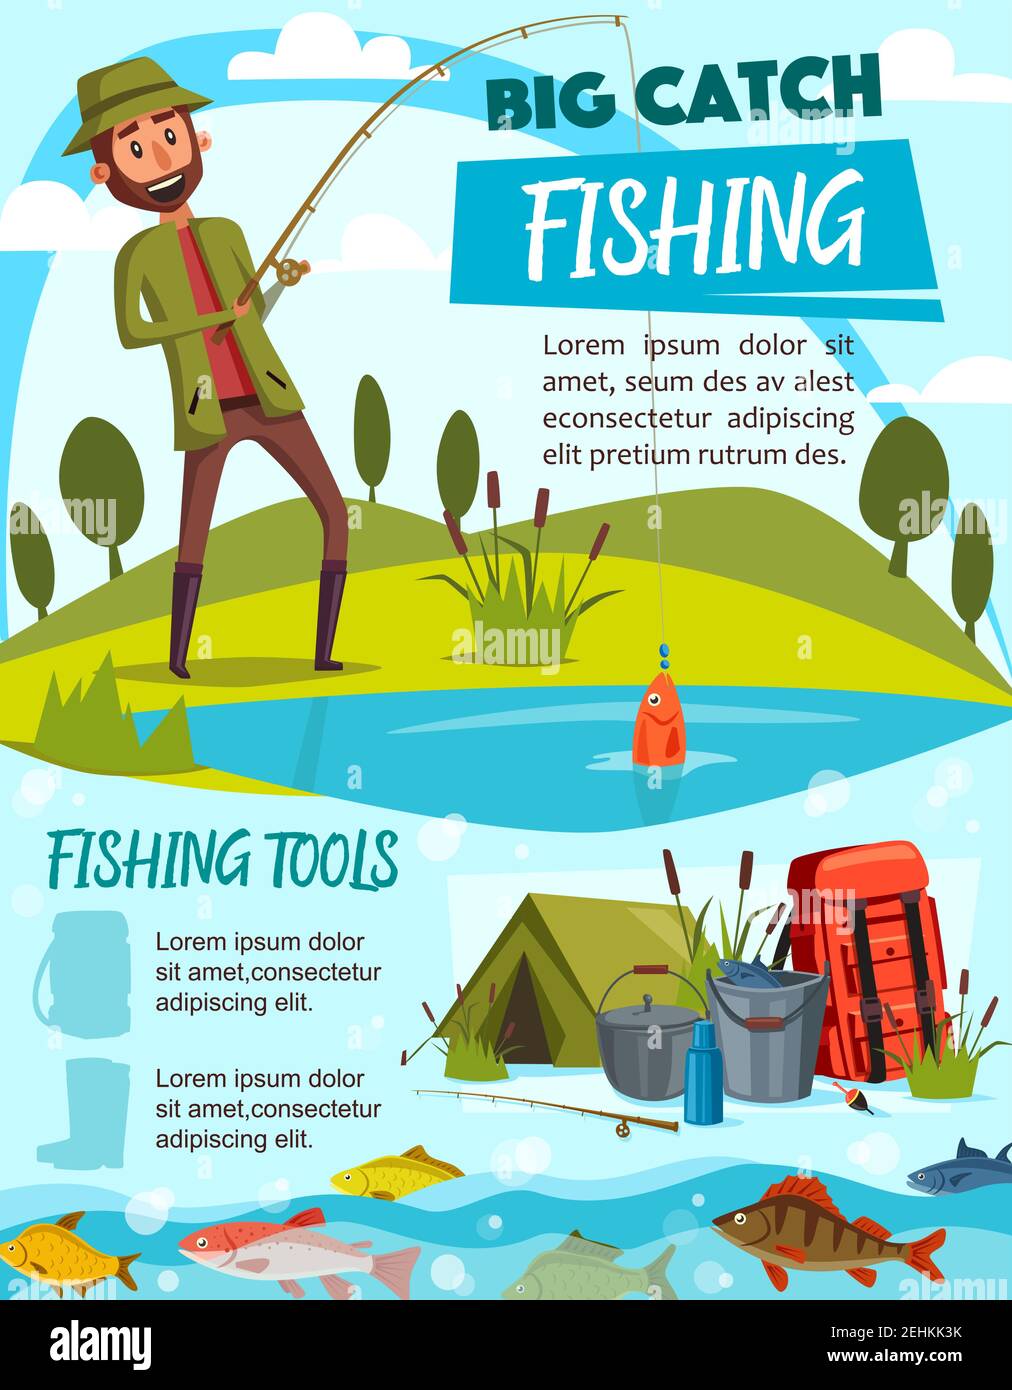 https://c8.alamy.com/comp/2EHKK3K/big-catch-fishing-fisherman-and-fishing-tackle-fisher-rod-and-hook-bait-lure-and-reel-carp-perch-and-float-tent-bucket-and-backpack-on-river-2EHKK3K.jpg